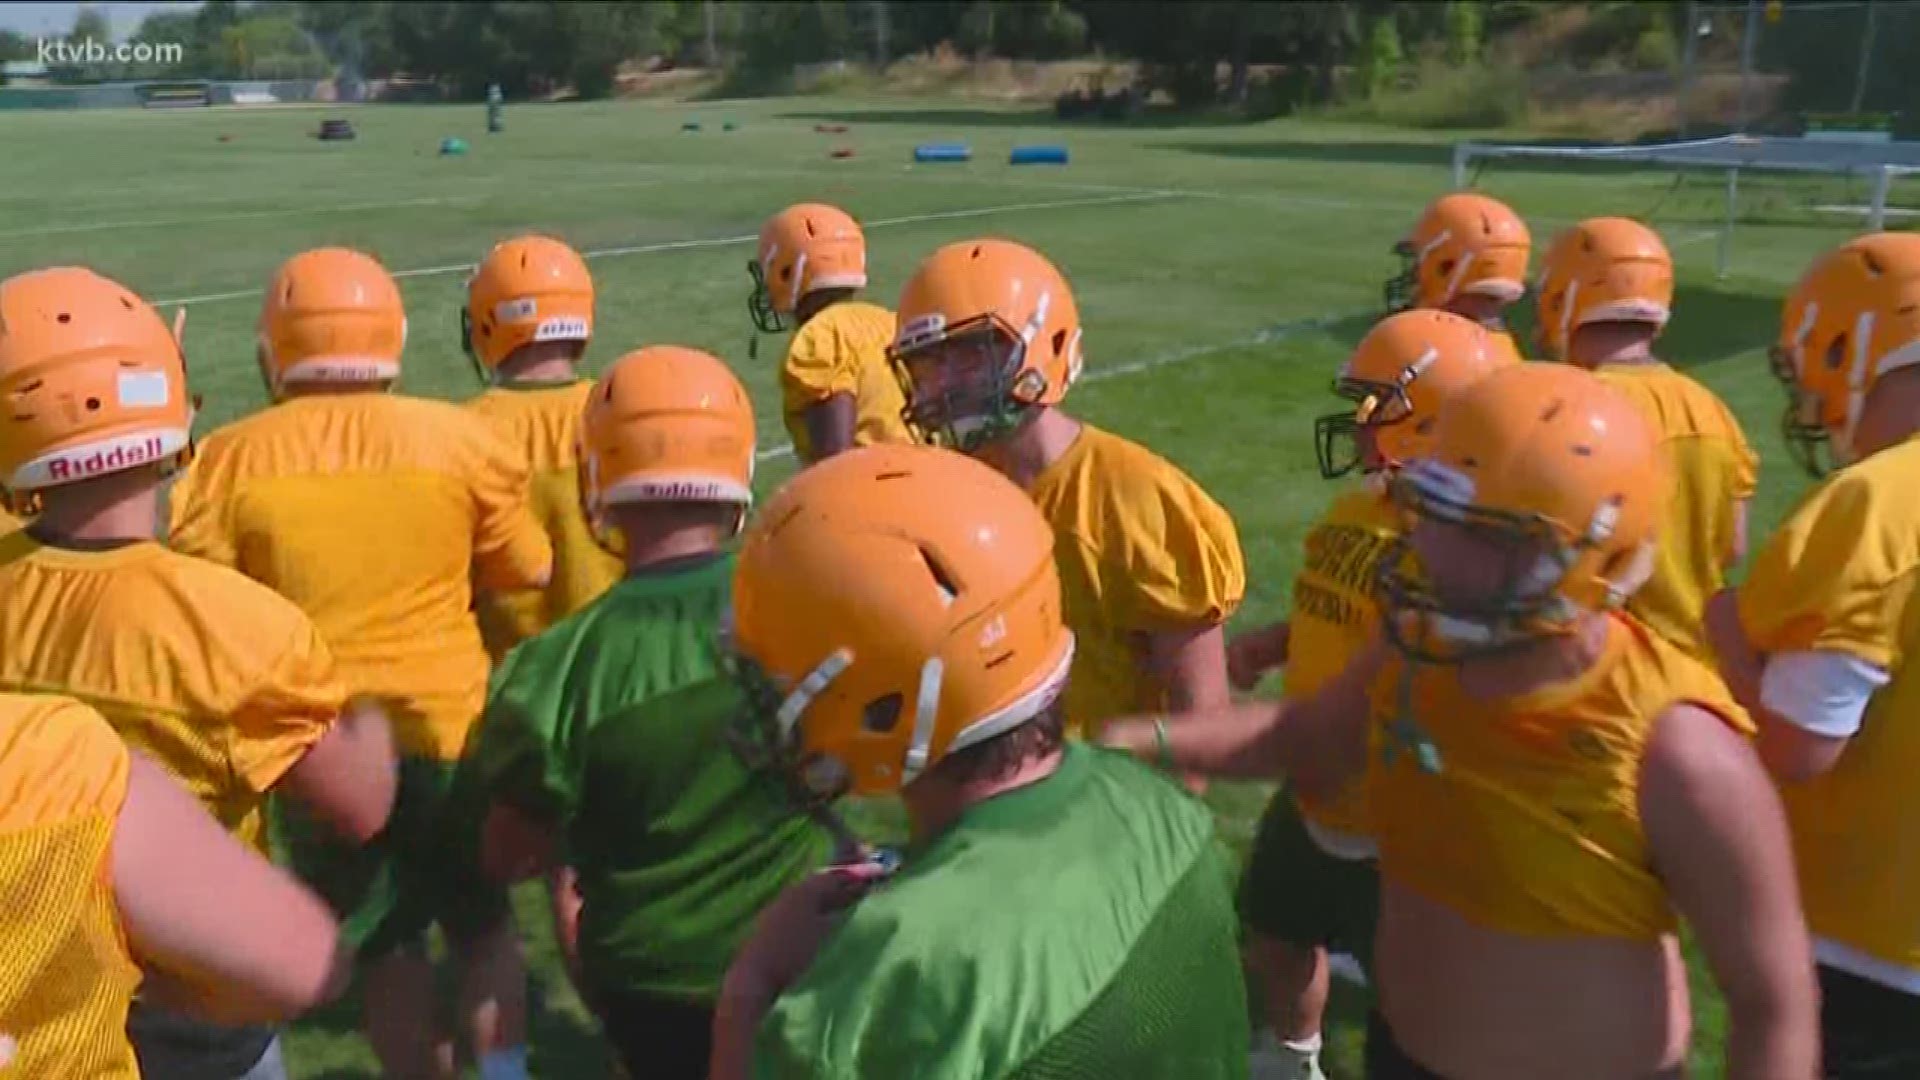 Fresh off their third playoff appearance in a row, Borah is looking for more this fall.